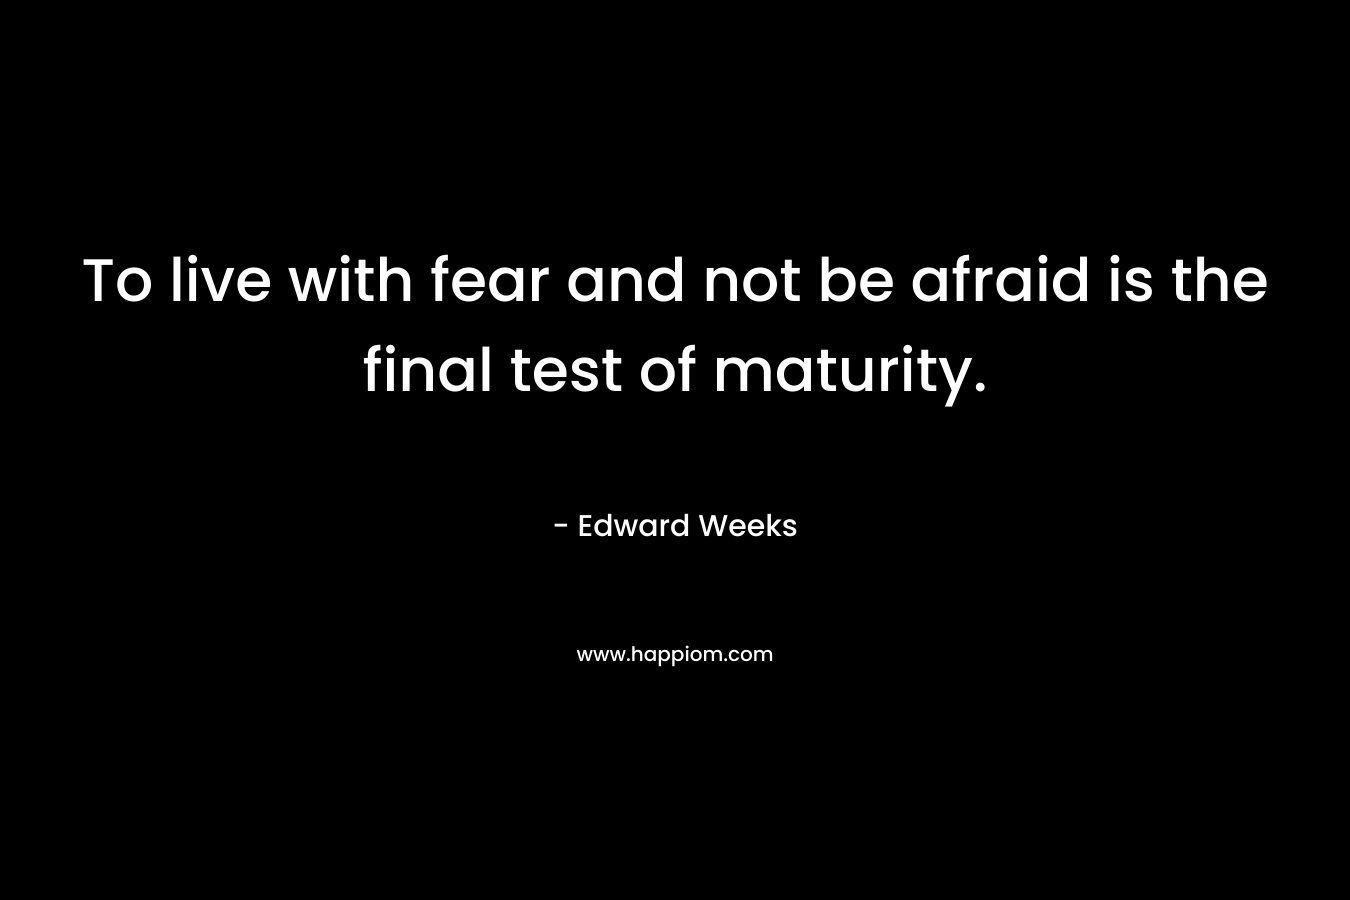 To live with fear and not be afraid is the final test of maturity.